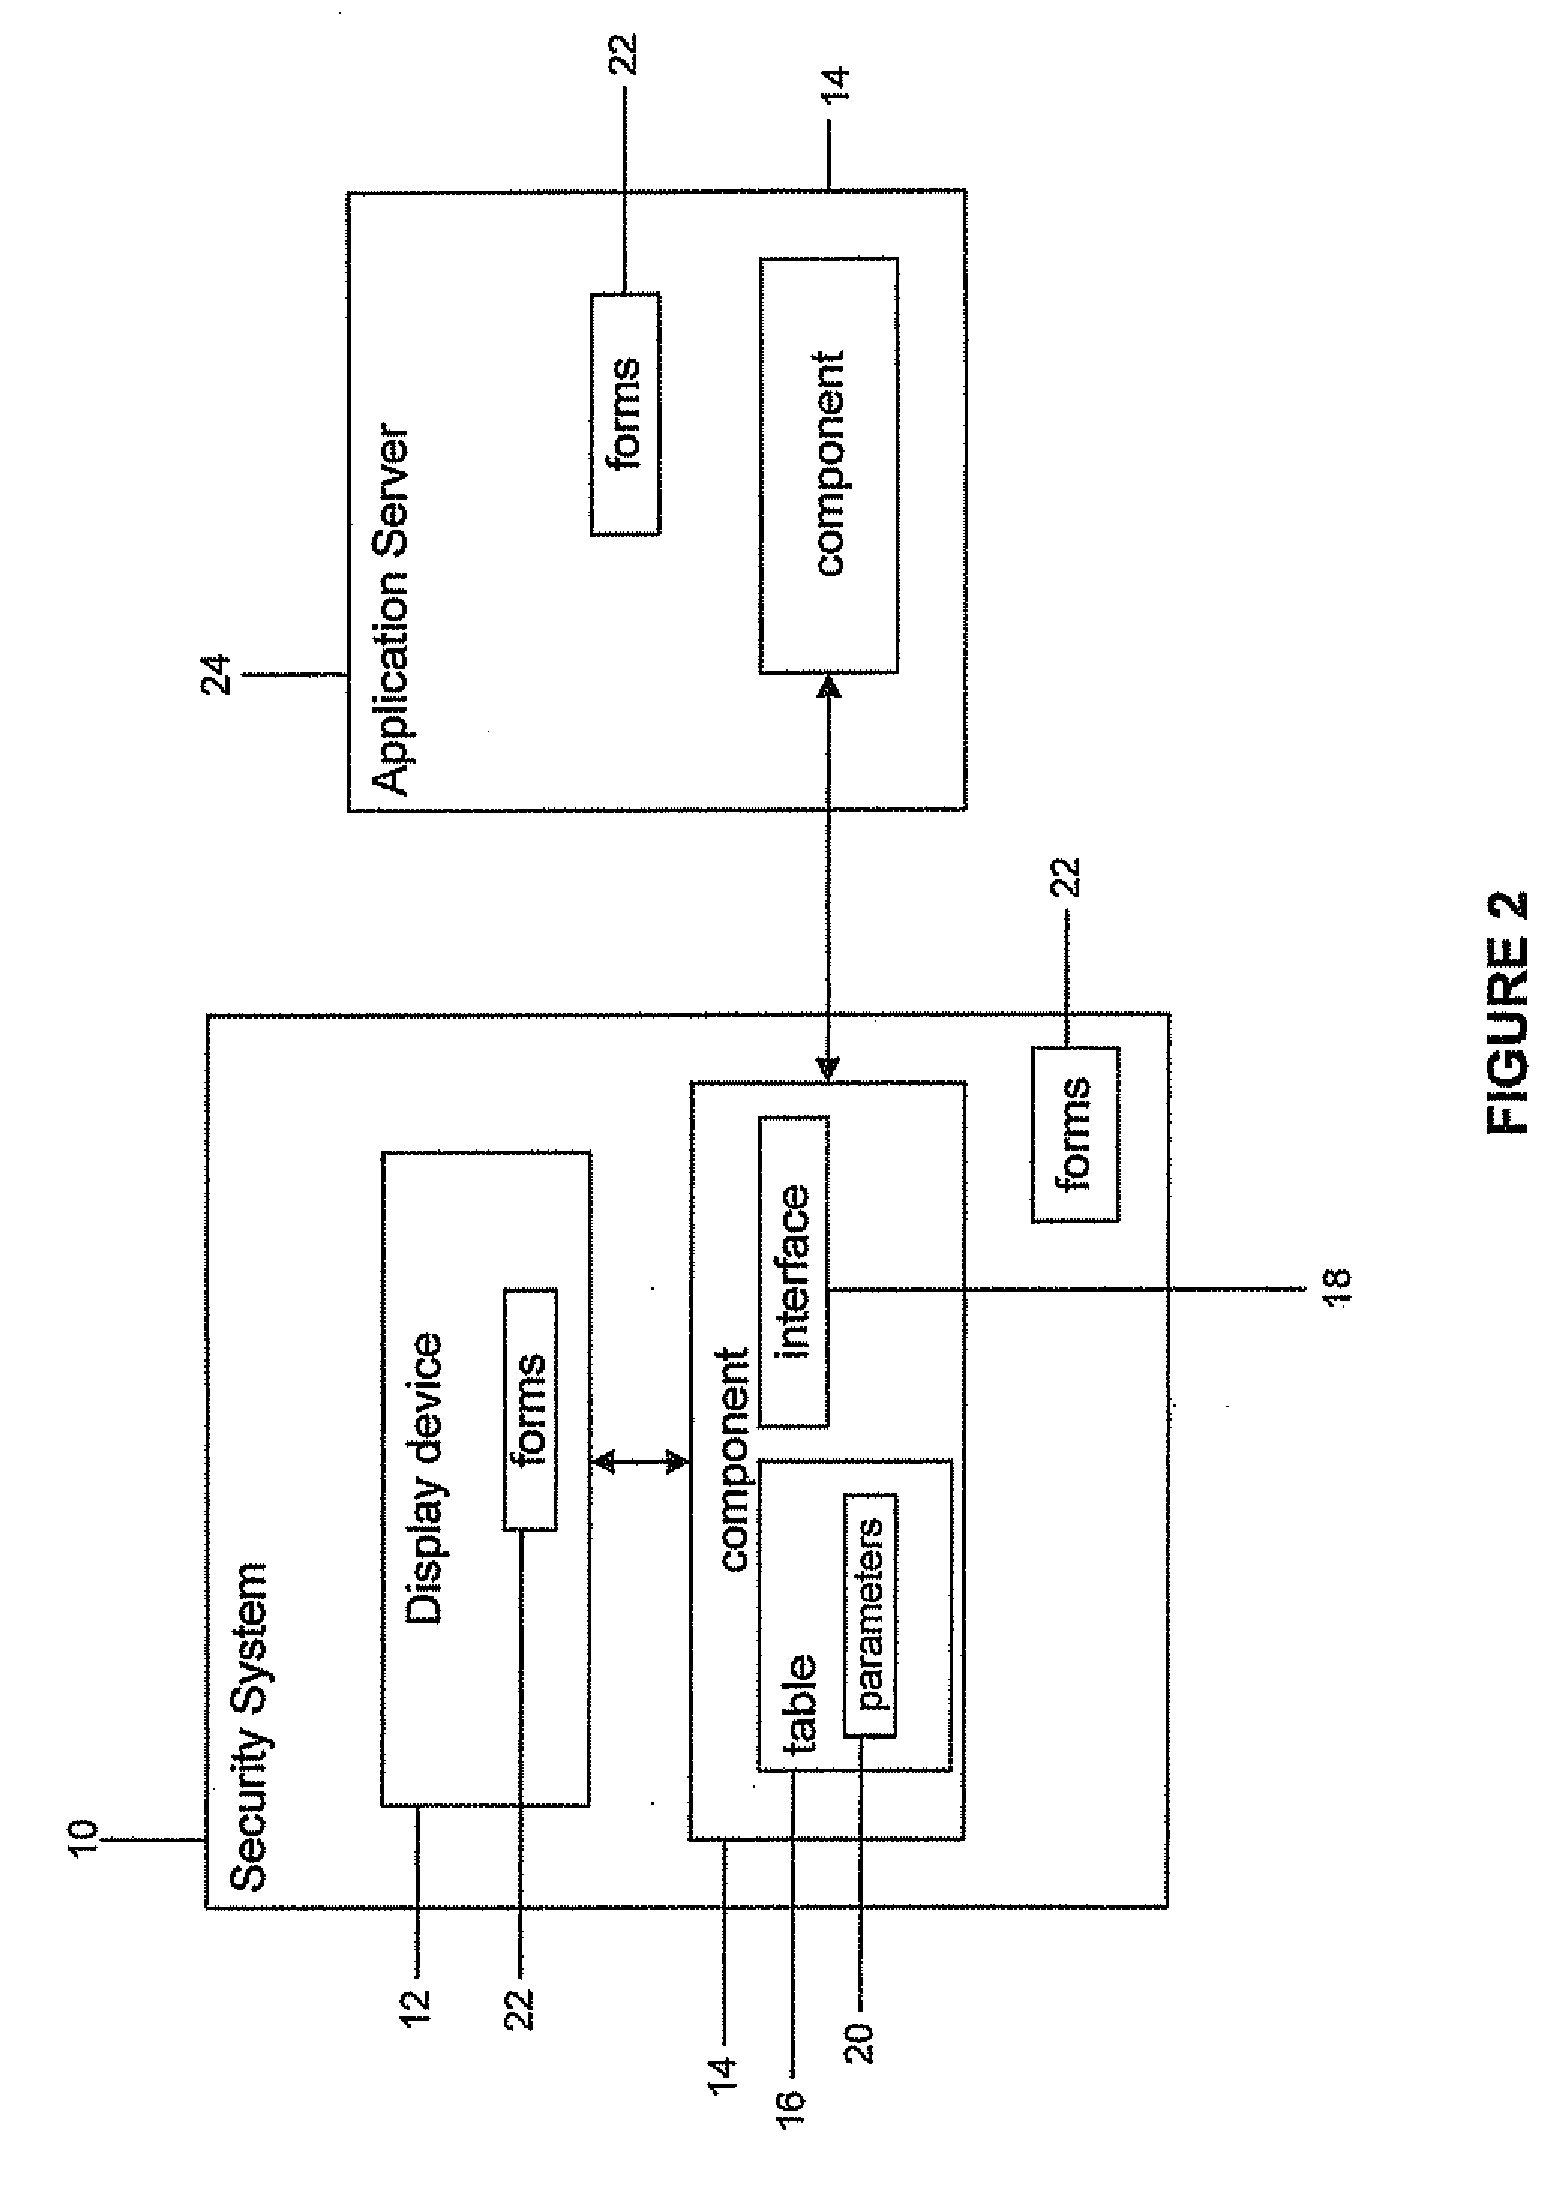 Device for coordinating displays on a security system